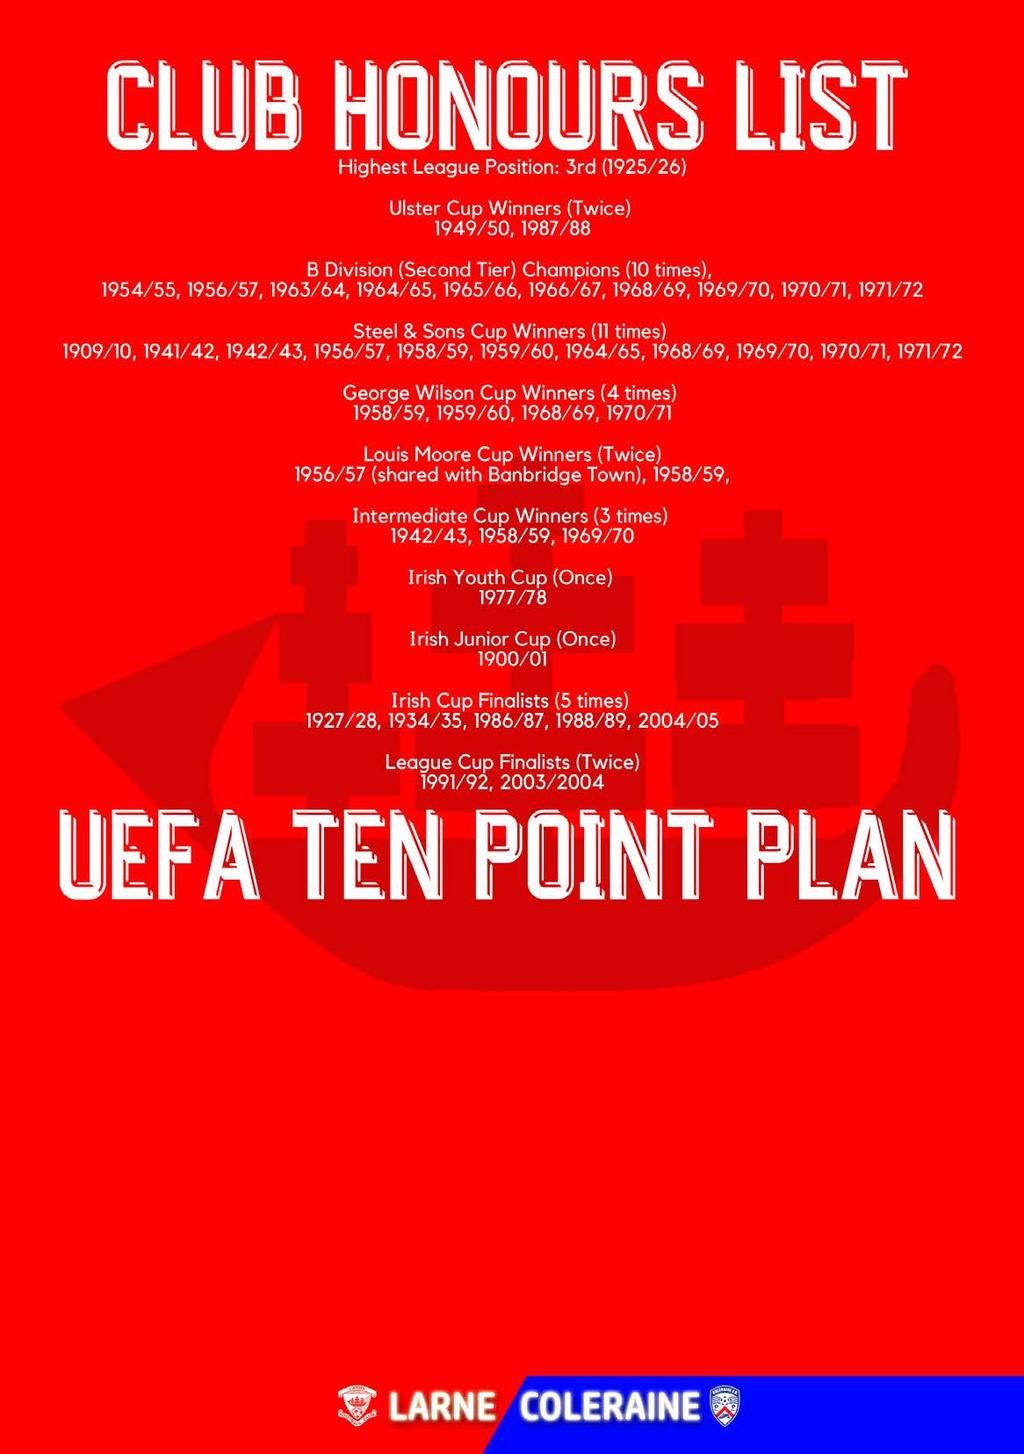 Larne Football Club supports and endorses the UEFA 10 Point Plan.